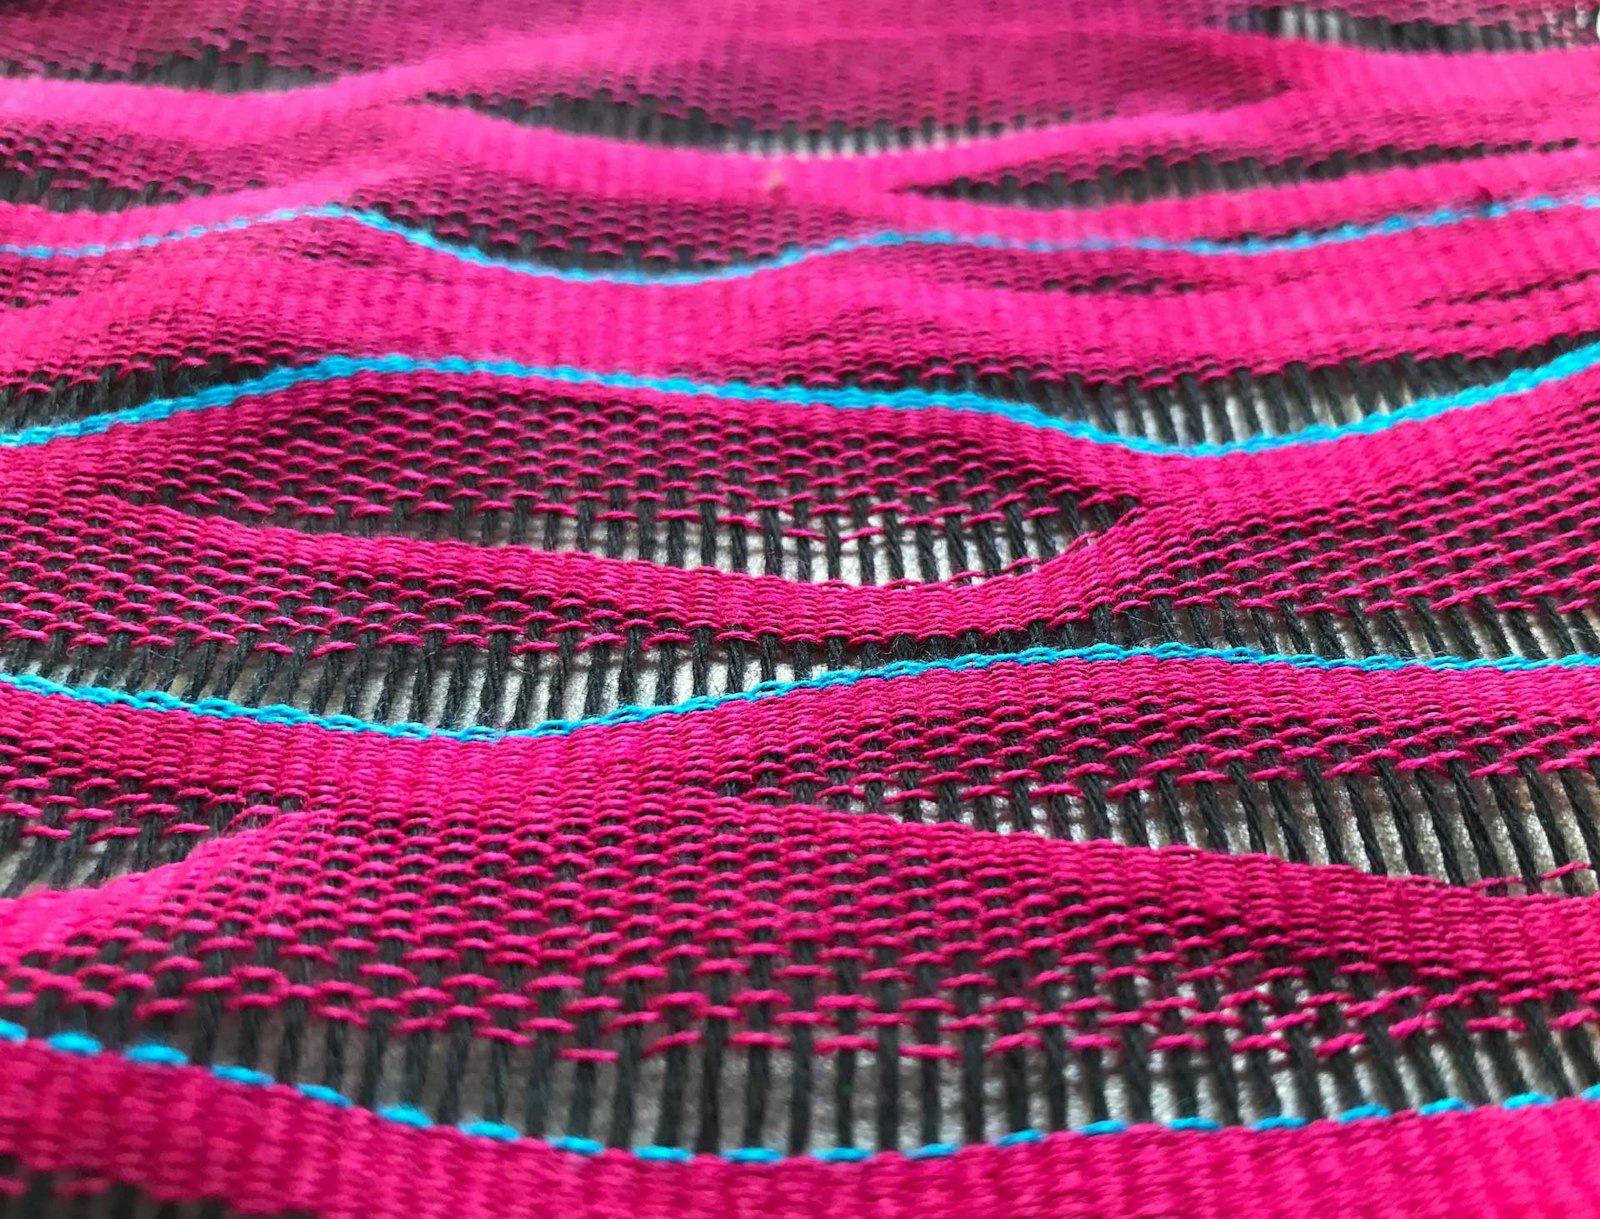 Weaving Curves with a Wave Stick